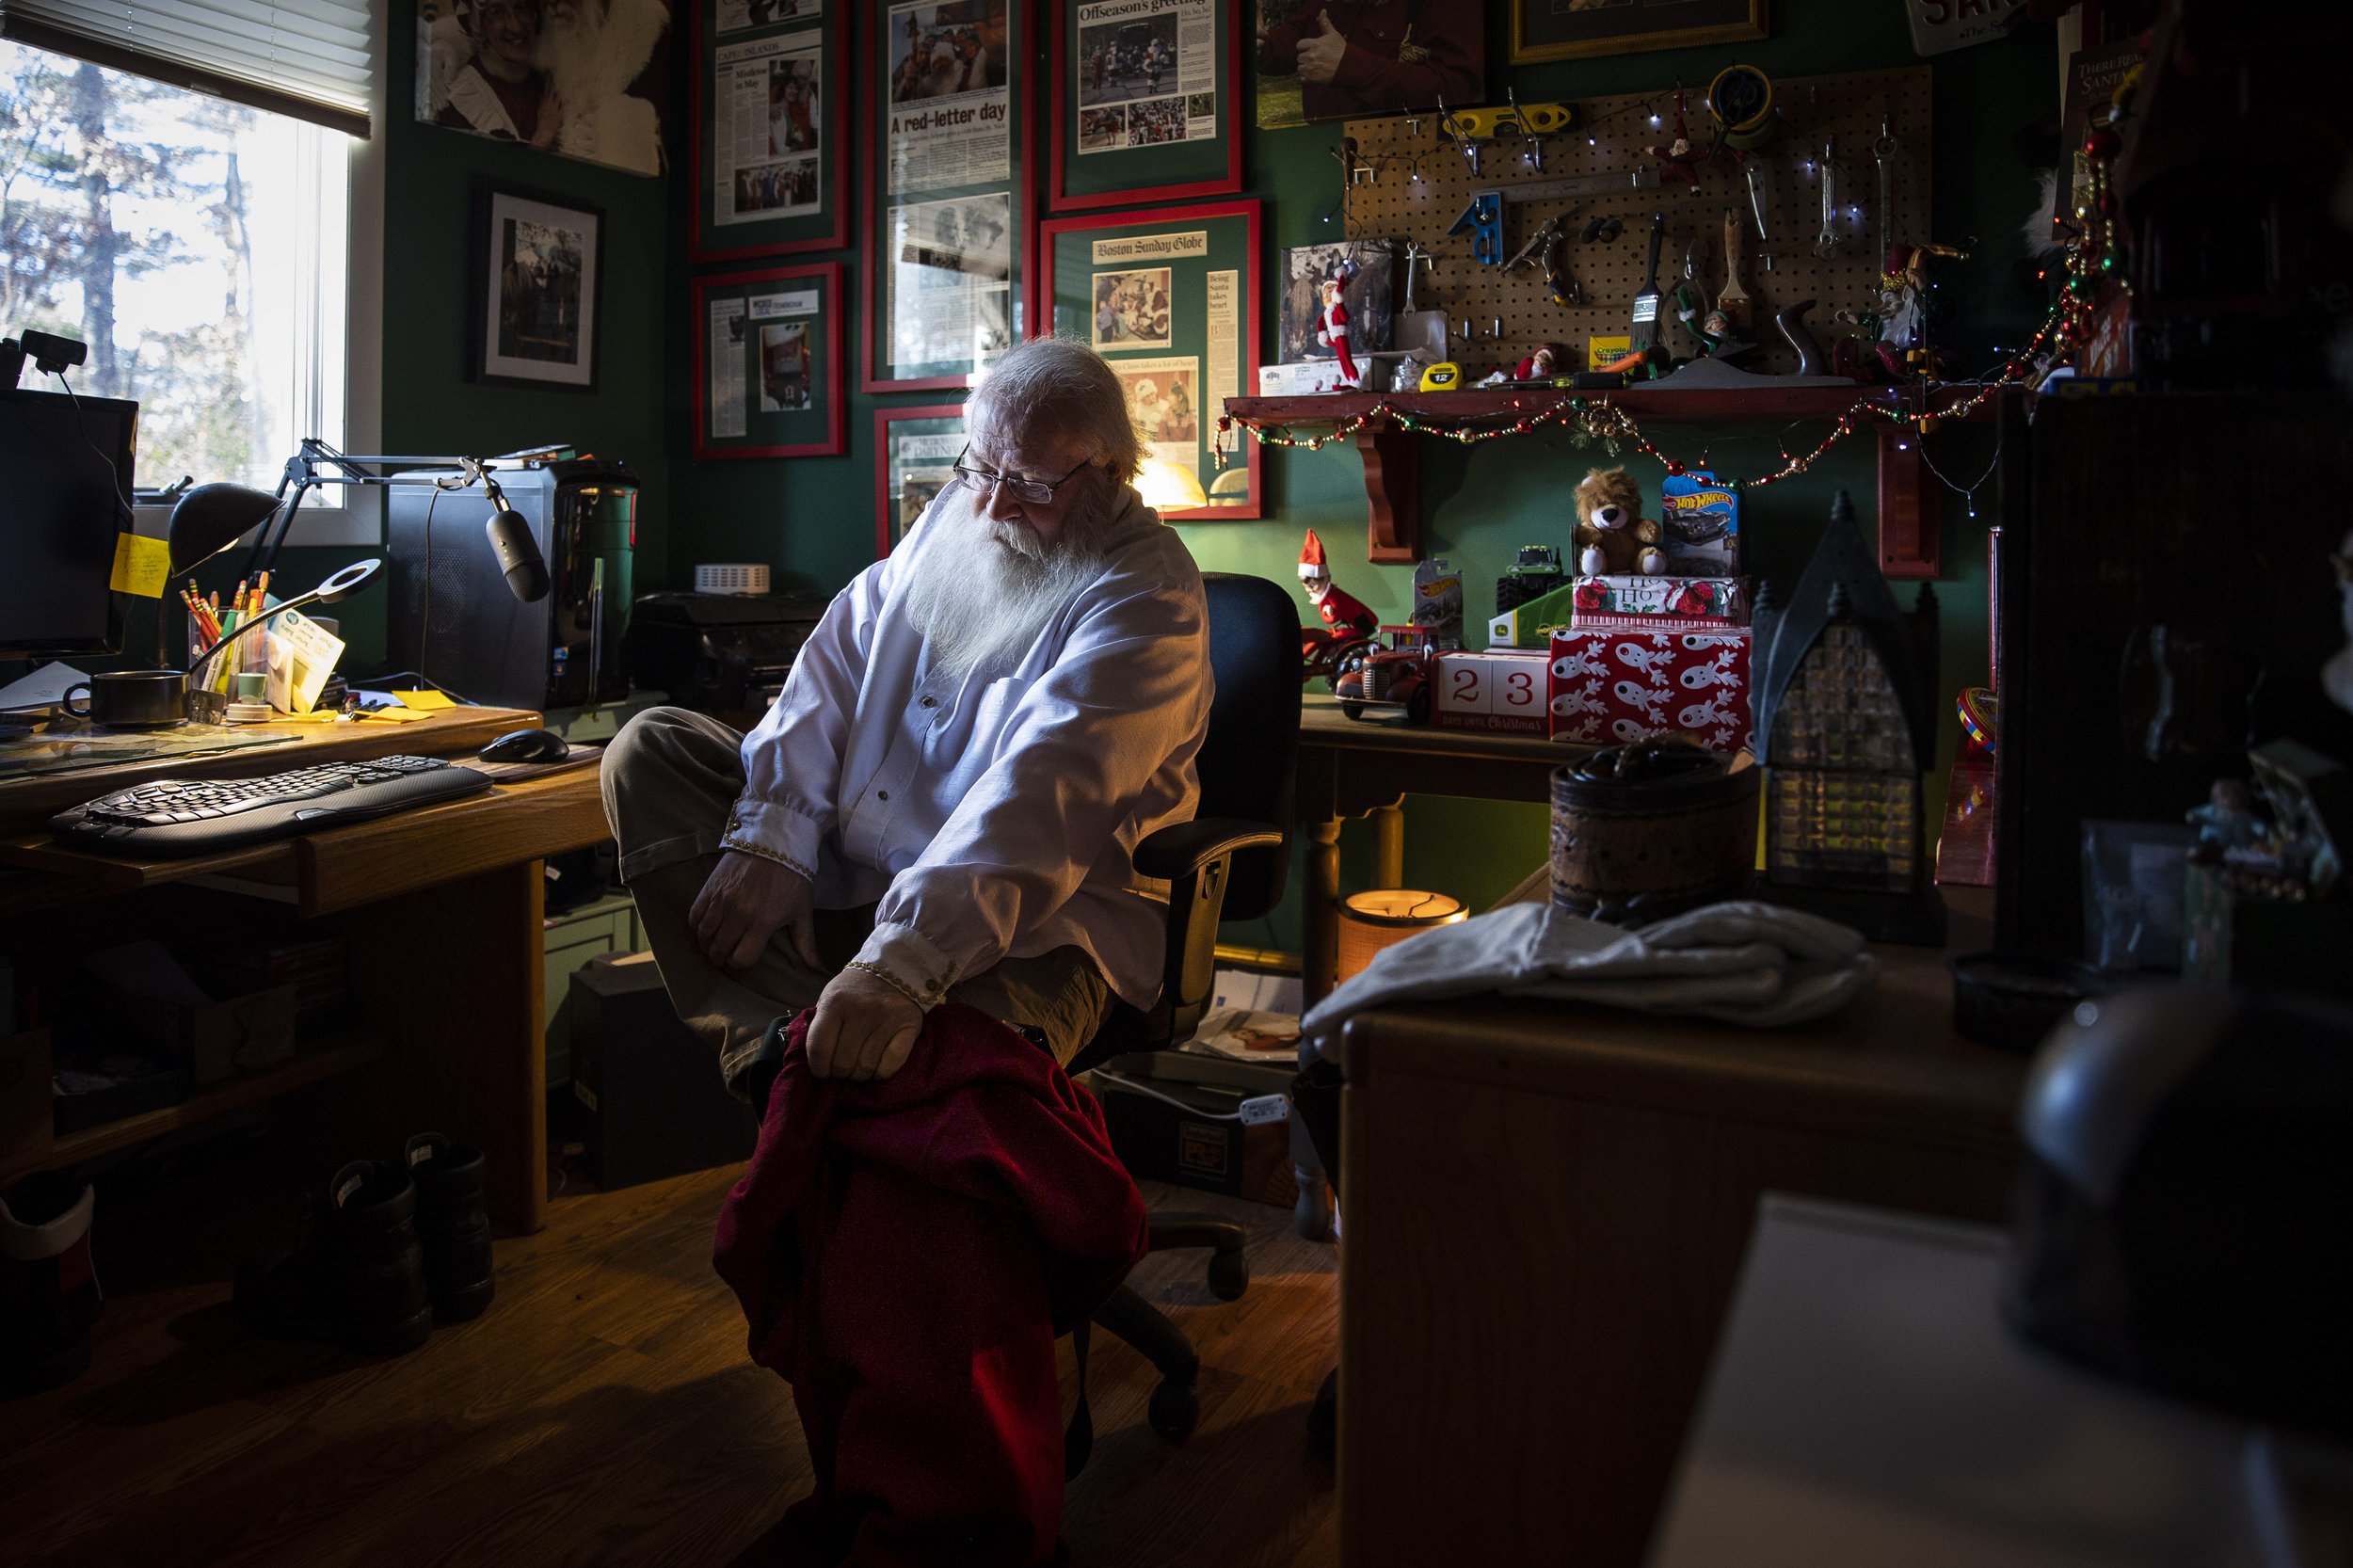  Bob Jordan puts on his Santa suit while in the office of his Framingham, Mass. home on December 2, 2022. He has the office decorated like Santa’s workshop; tools lining the walls and carefully wrapped Christmas presents rest behind his chair. It cam